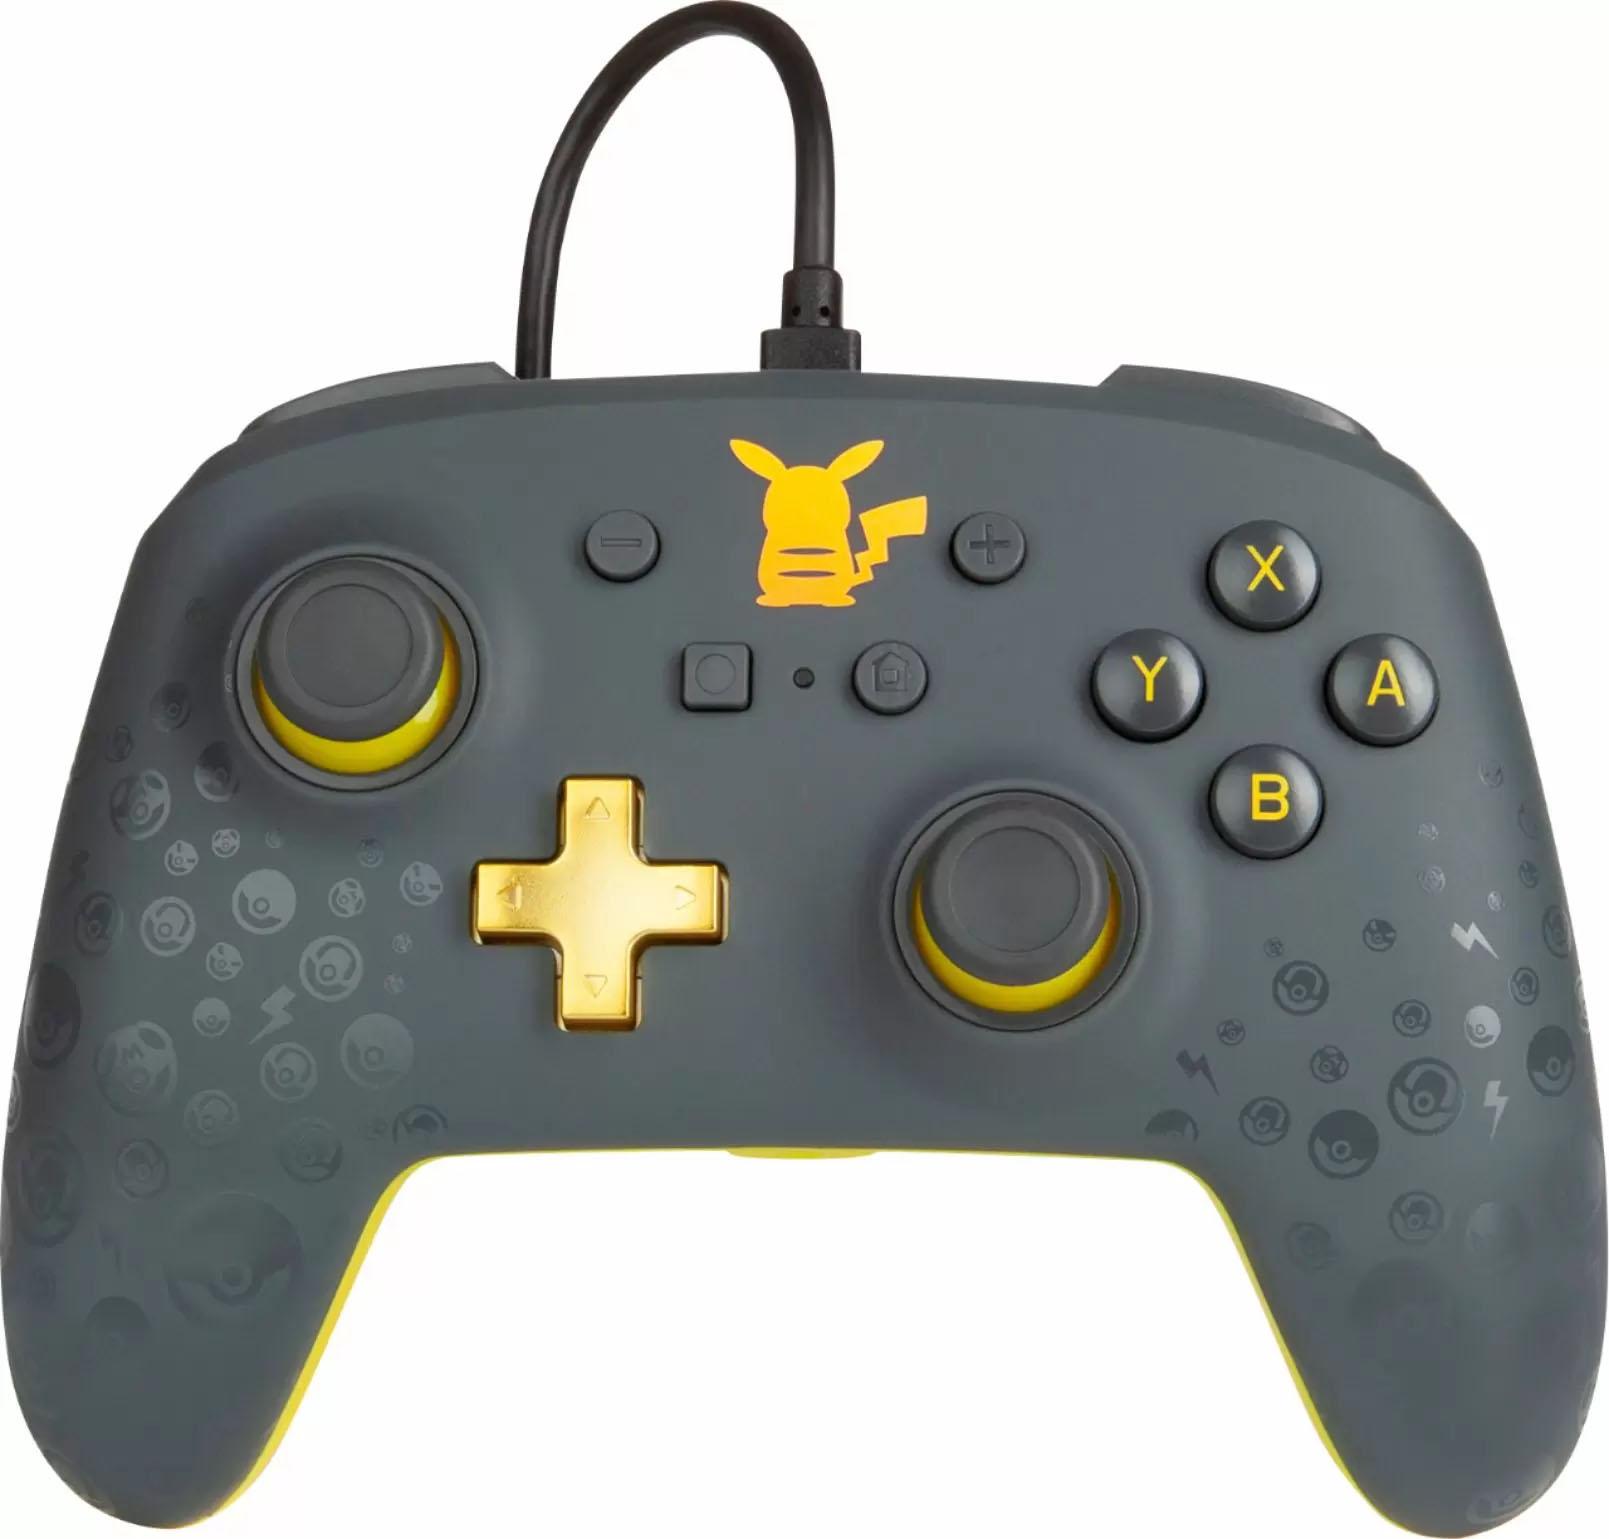 PowerA Enhanced Wired Controller for Nintendo Switch for $14.99